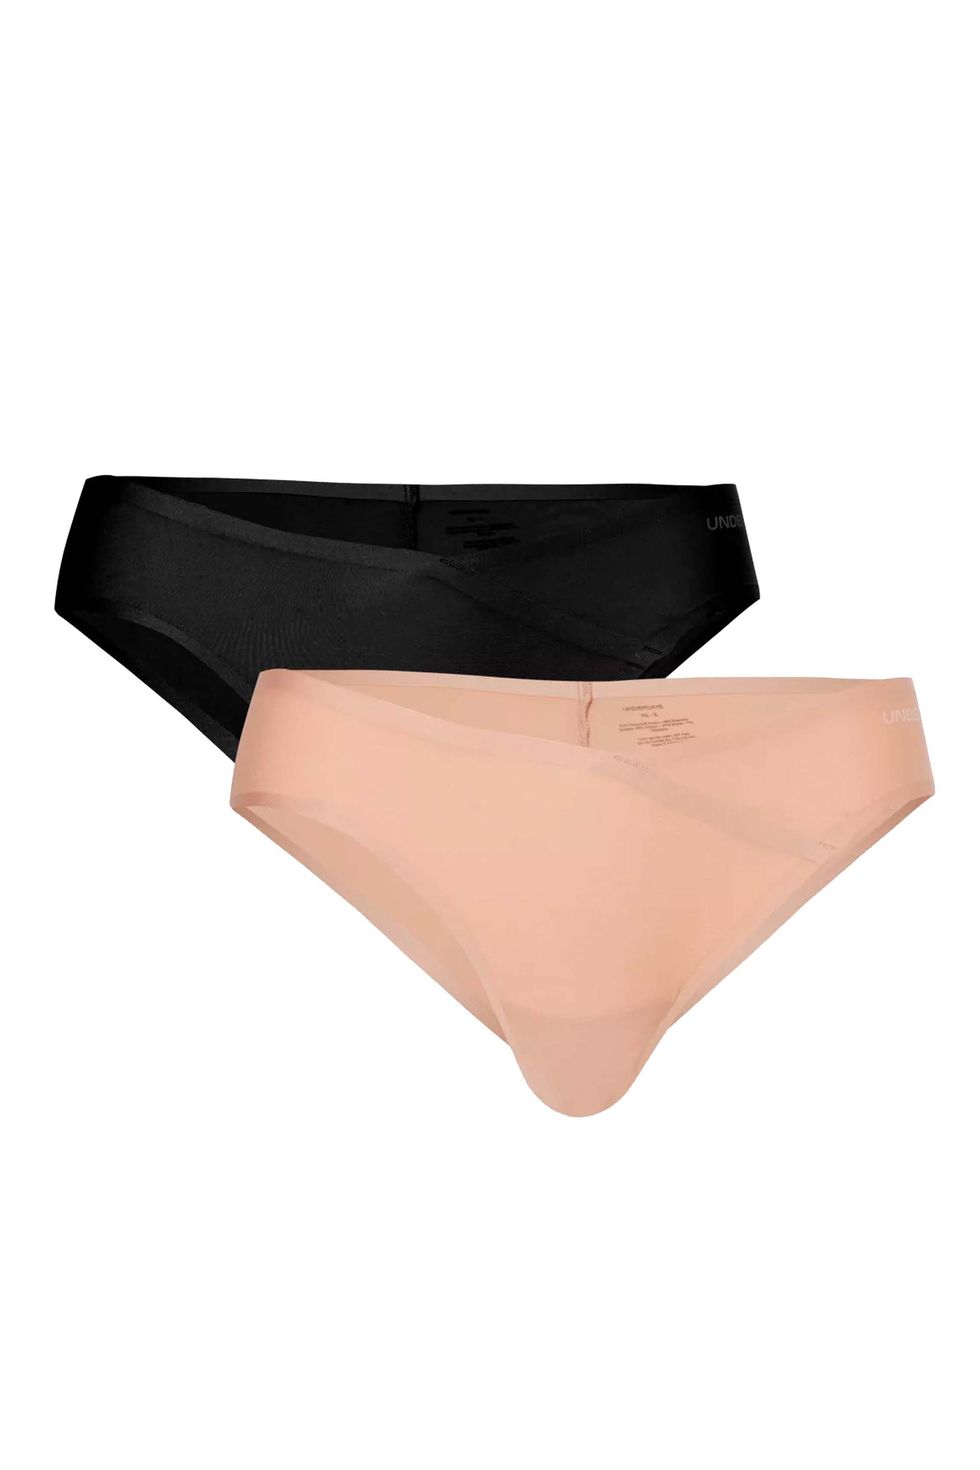 16 of the Best Underwear Brands to Shop on the Internet - Features 